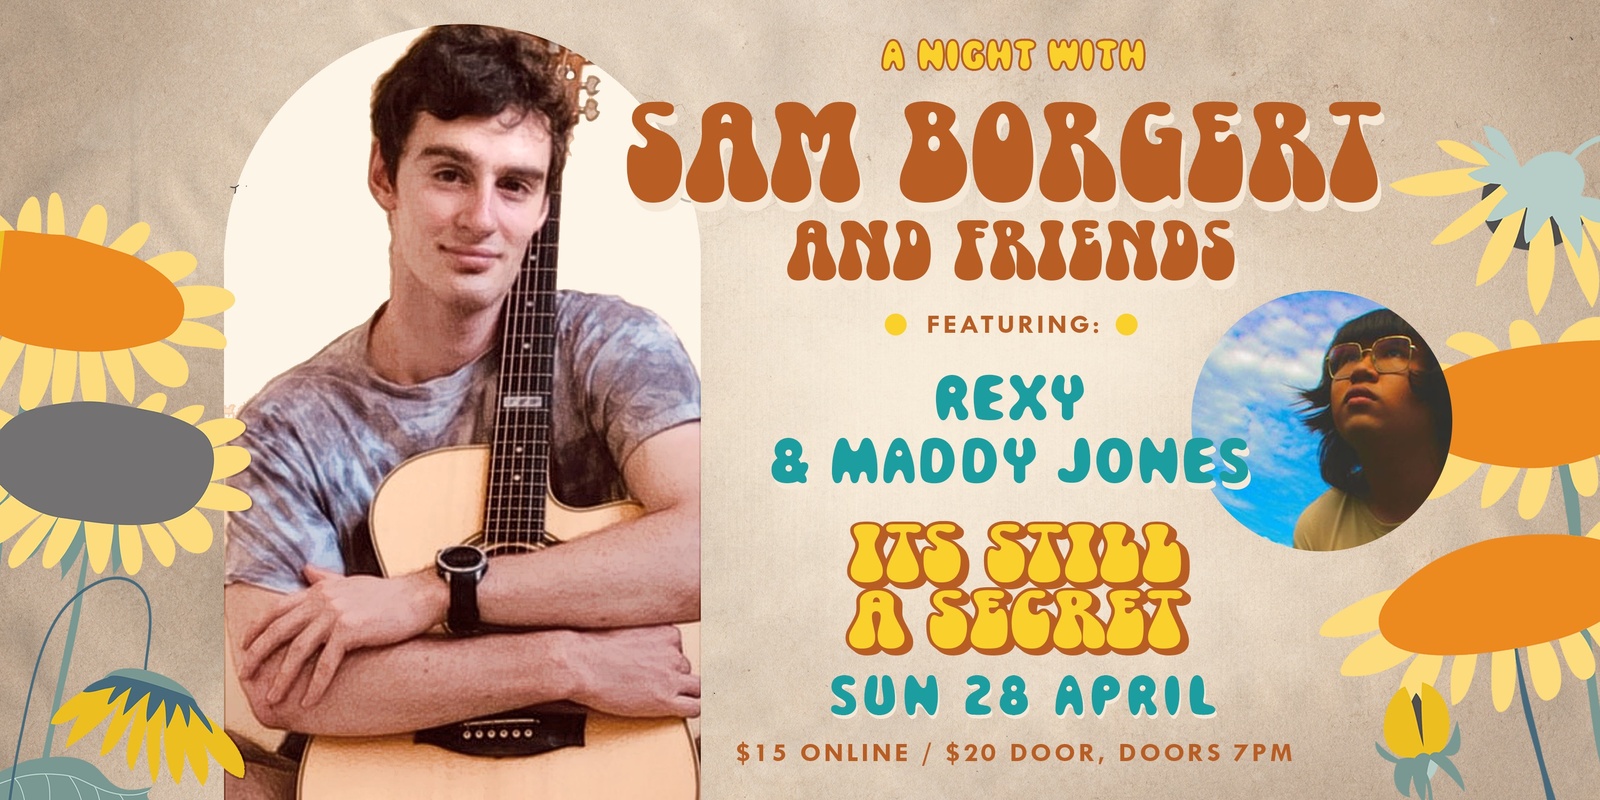 Banner image for A night with Sam Borgert and friends.